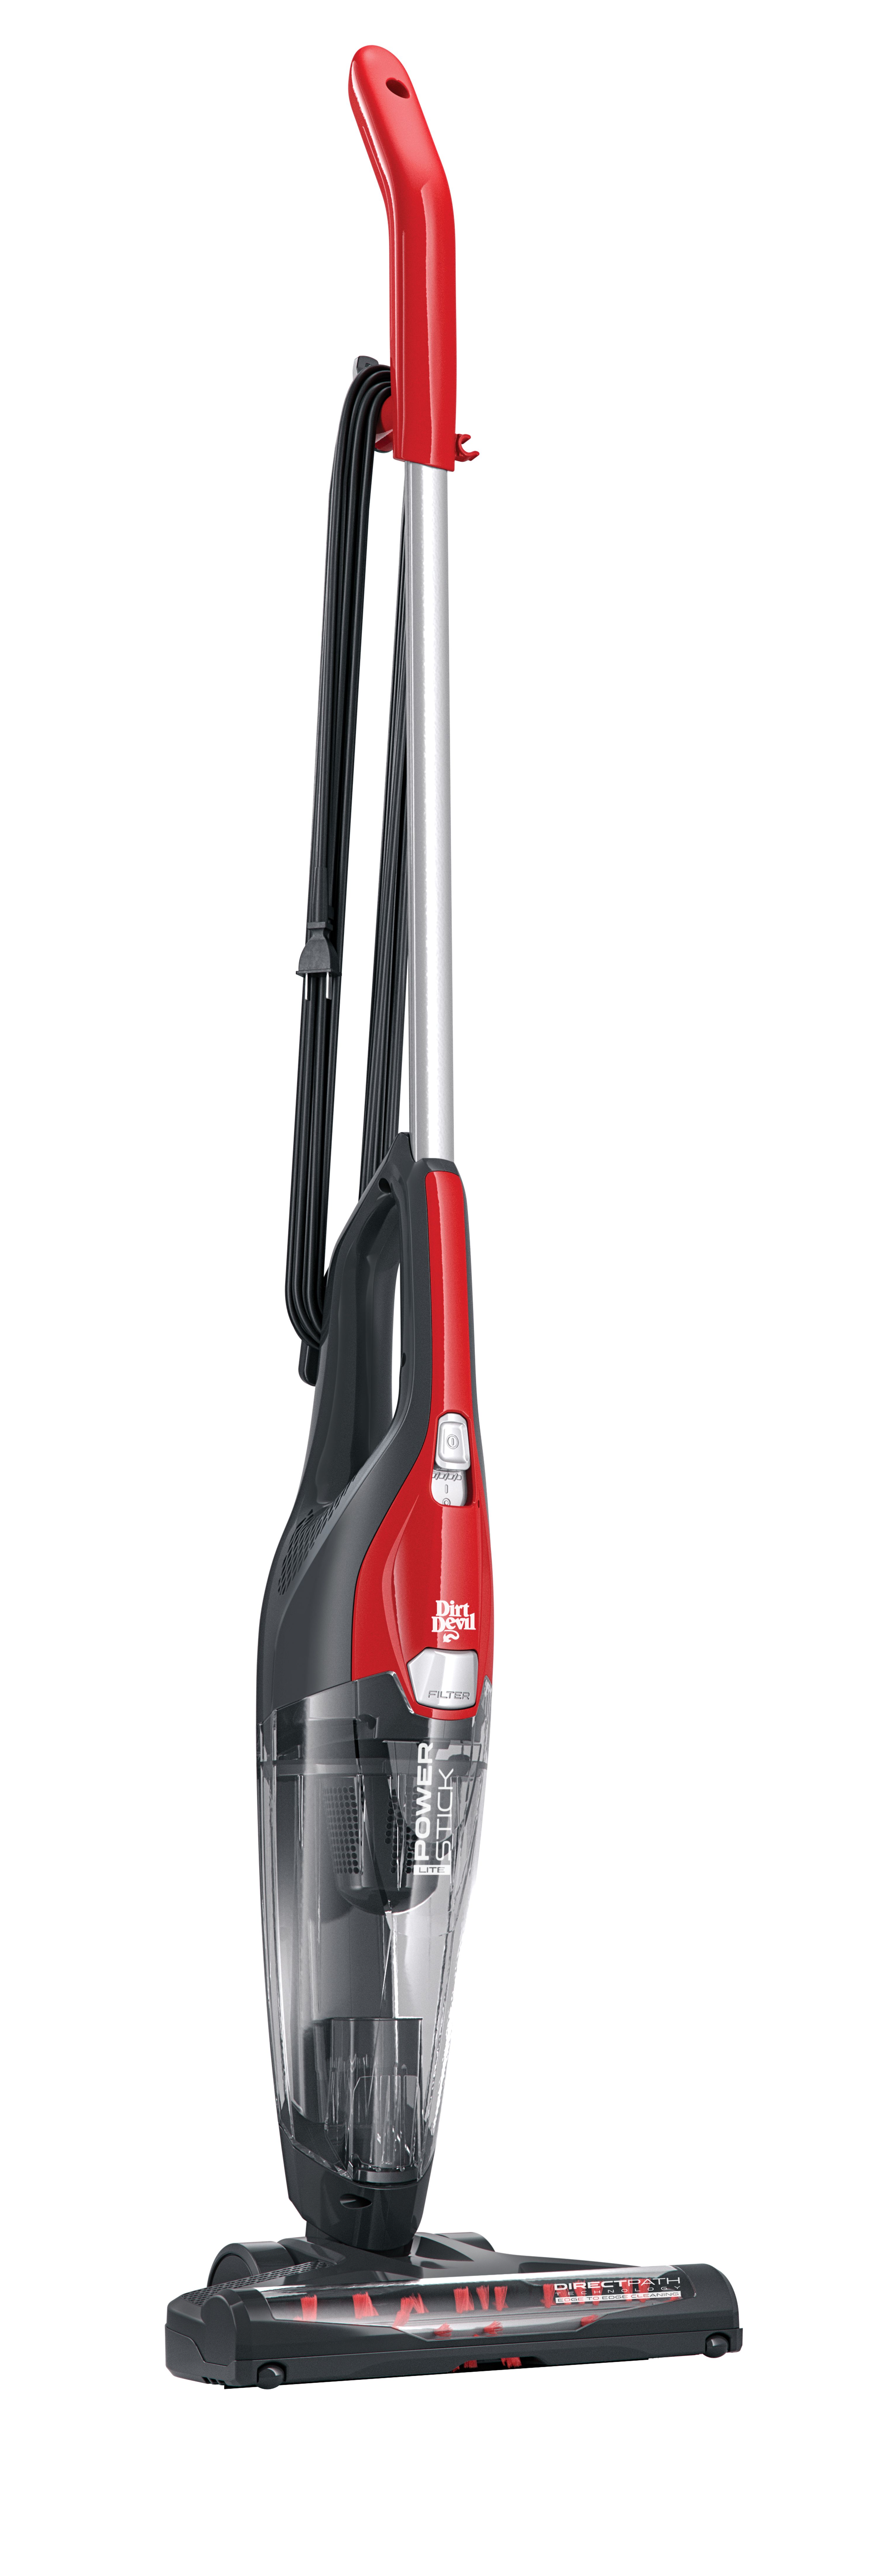 Dirt Devil Power Stick Lite 4-in-1 Corded Stick Vacuum Cleaner, SD22030, New - image 3 of 6